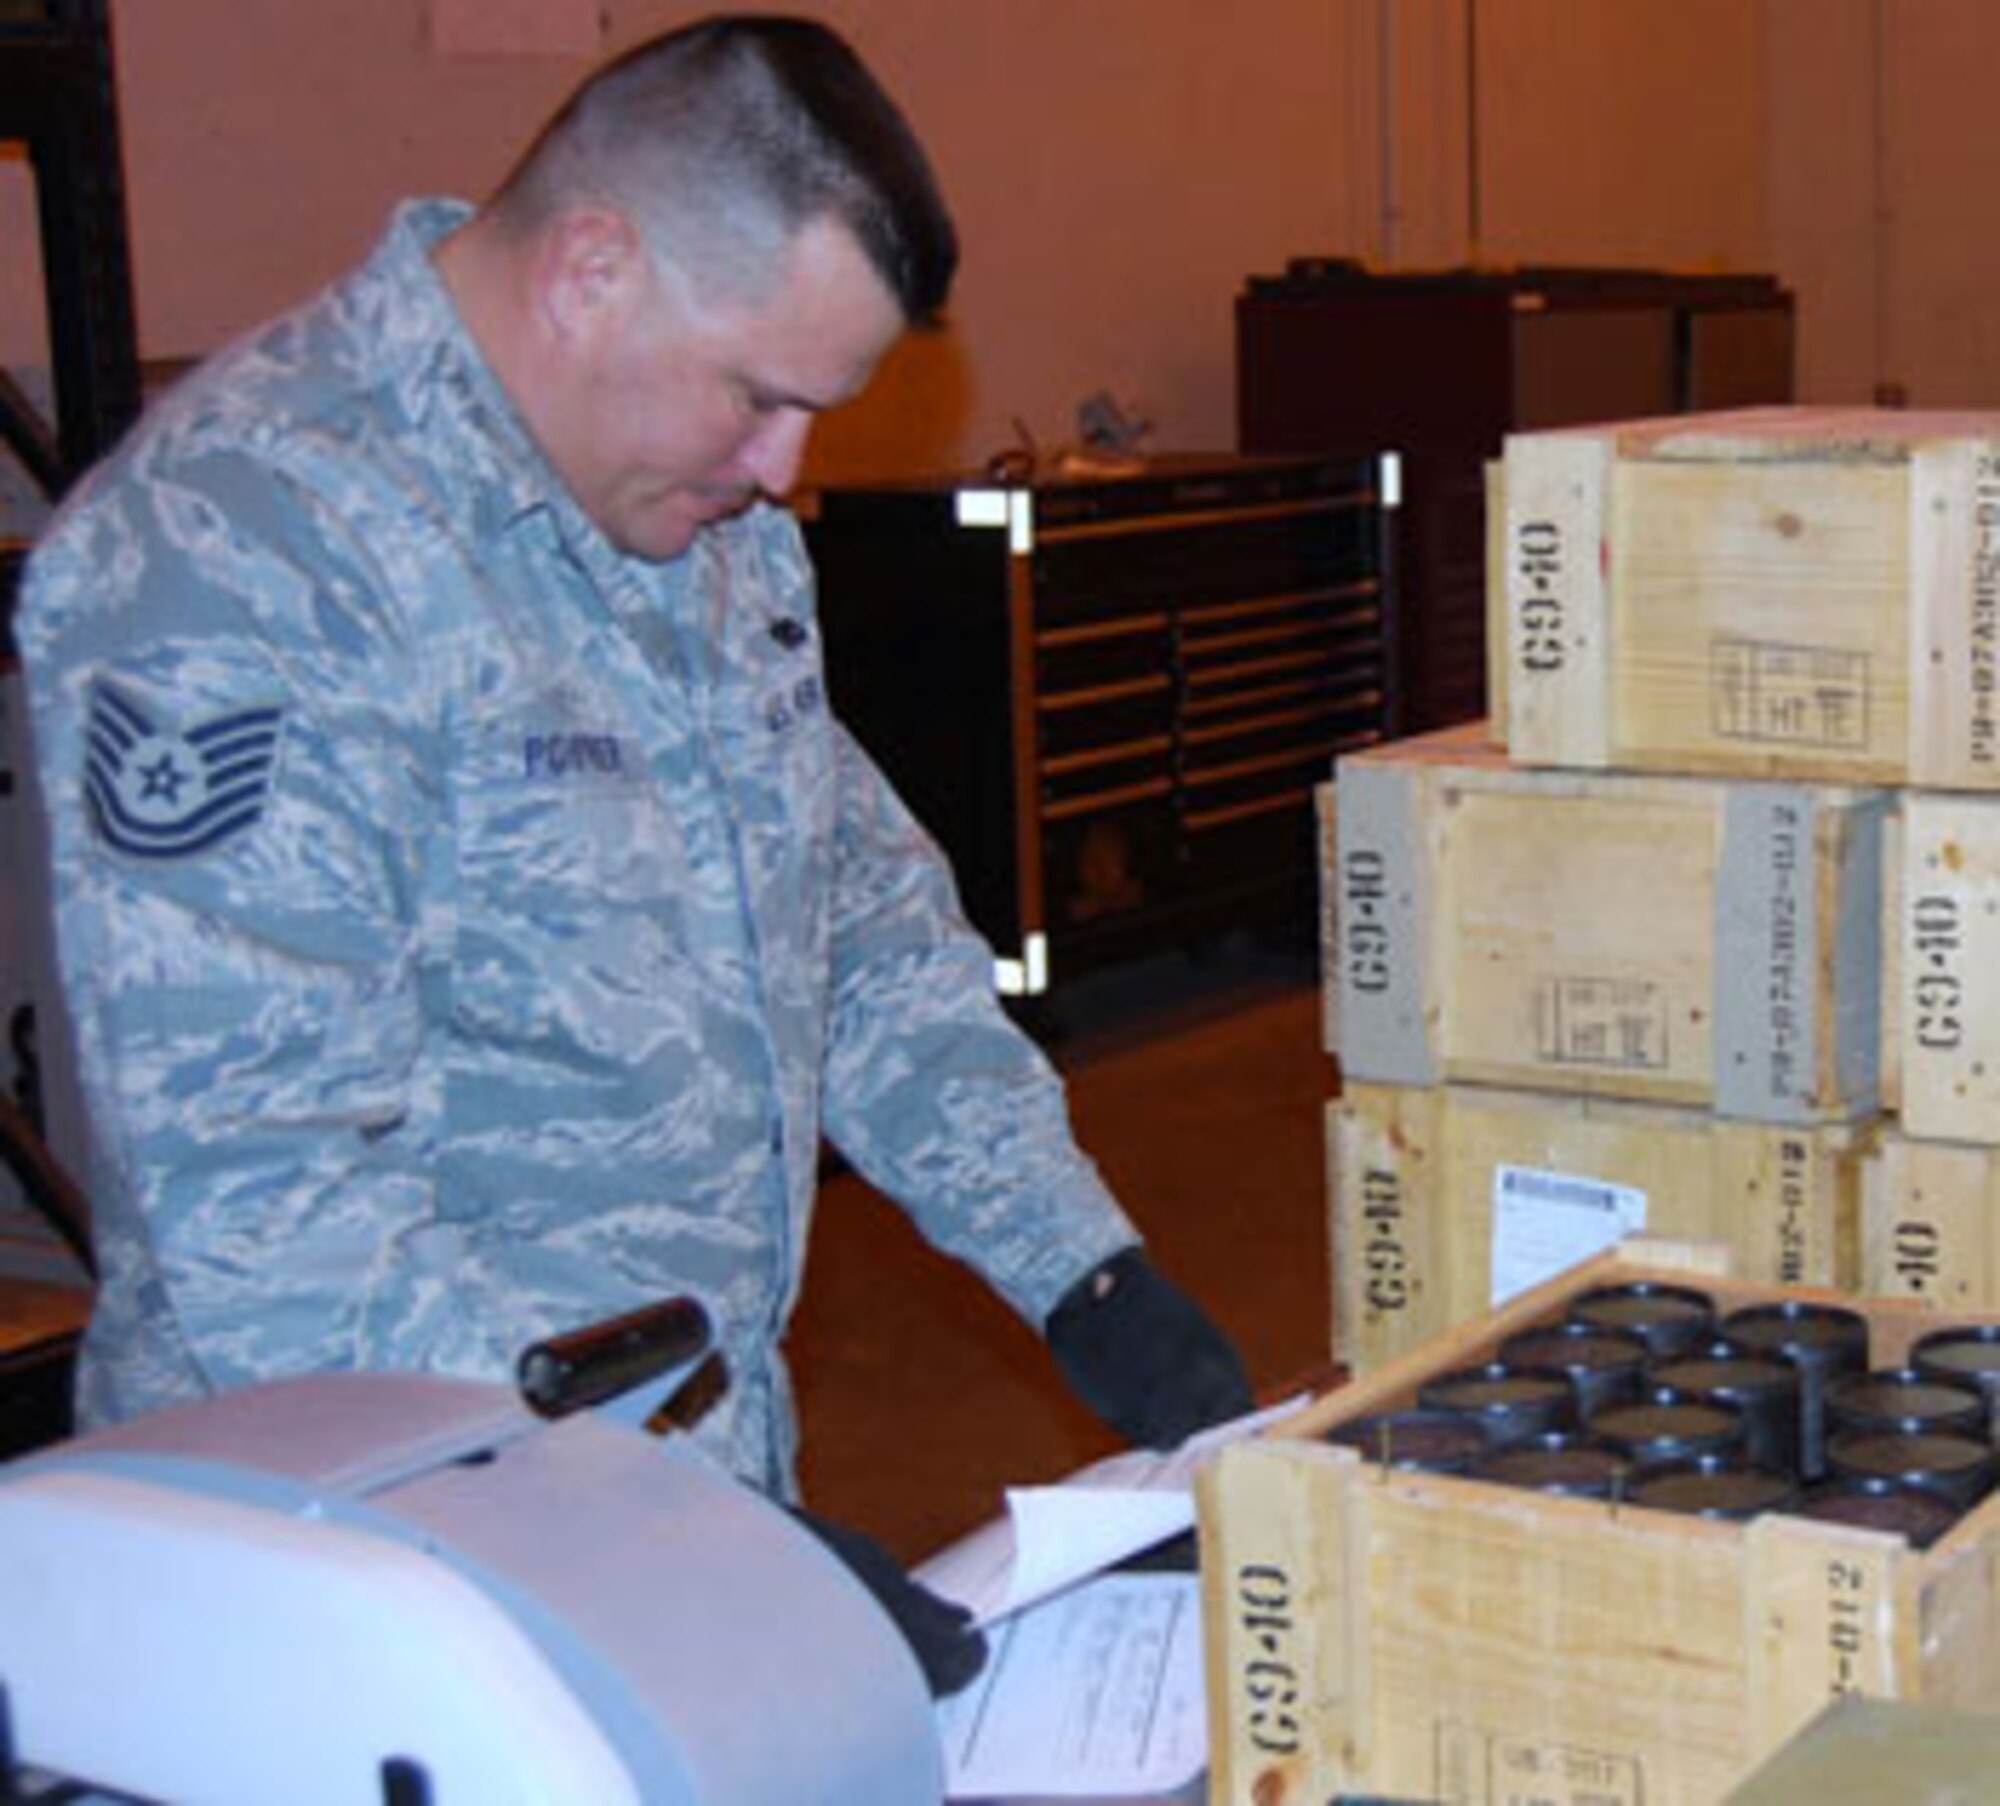 Tech. Sgt. James Poirrier, 43rd Logistics Readiness Squadron, checks out some munitions while deployed to Iraq.
